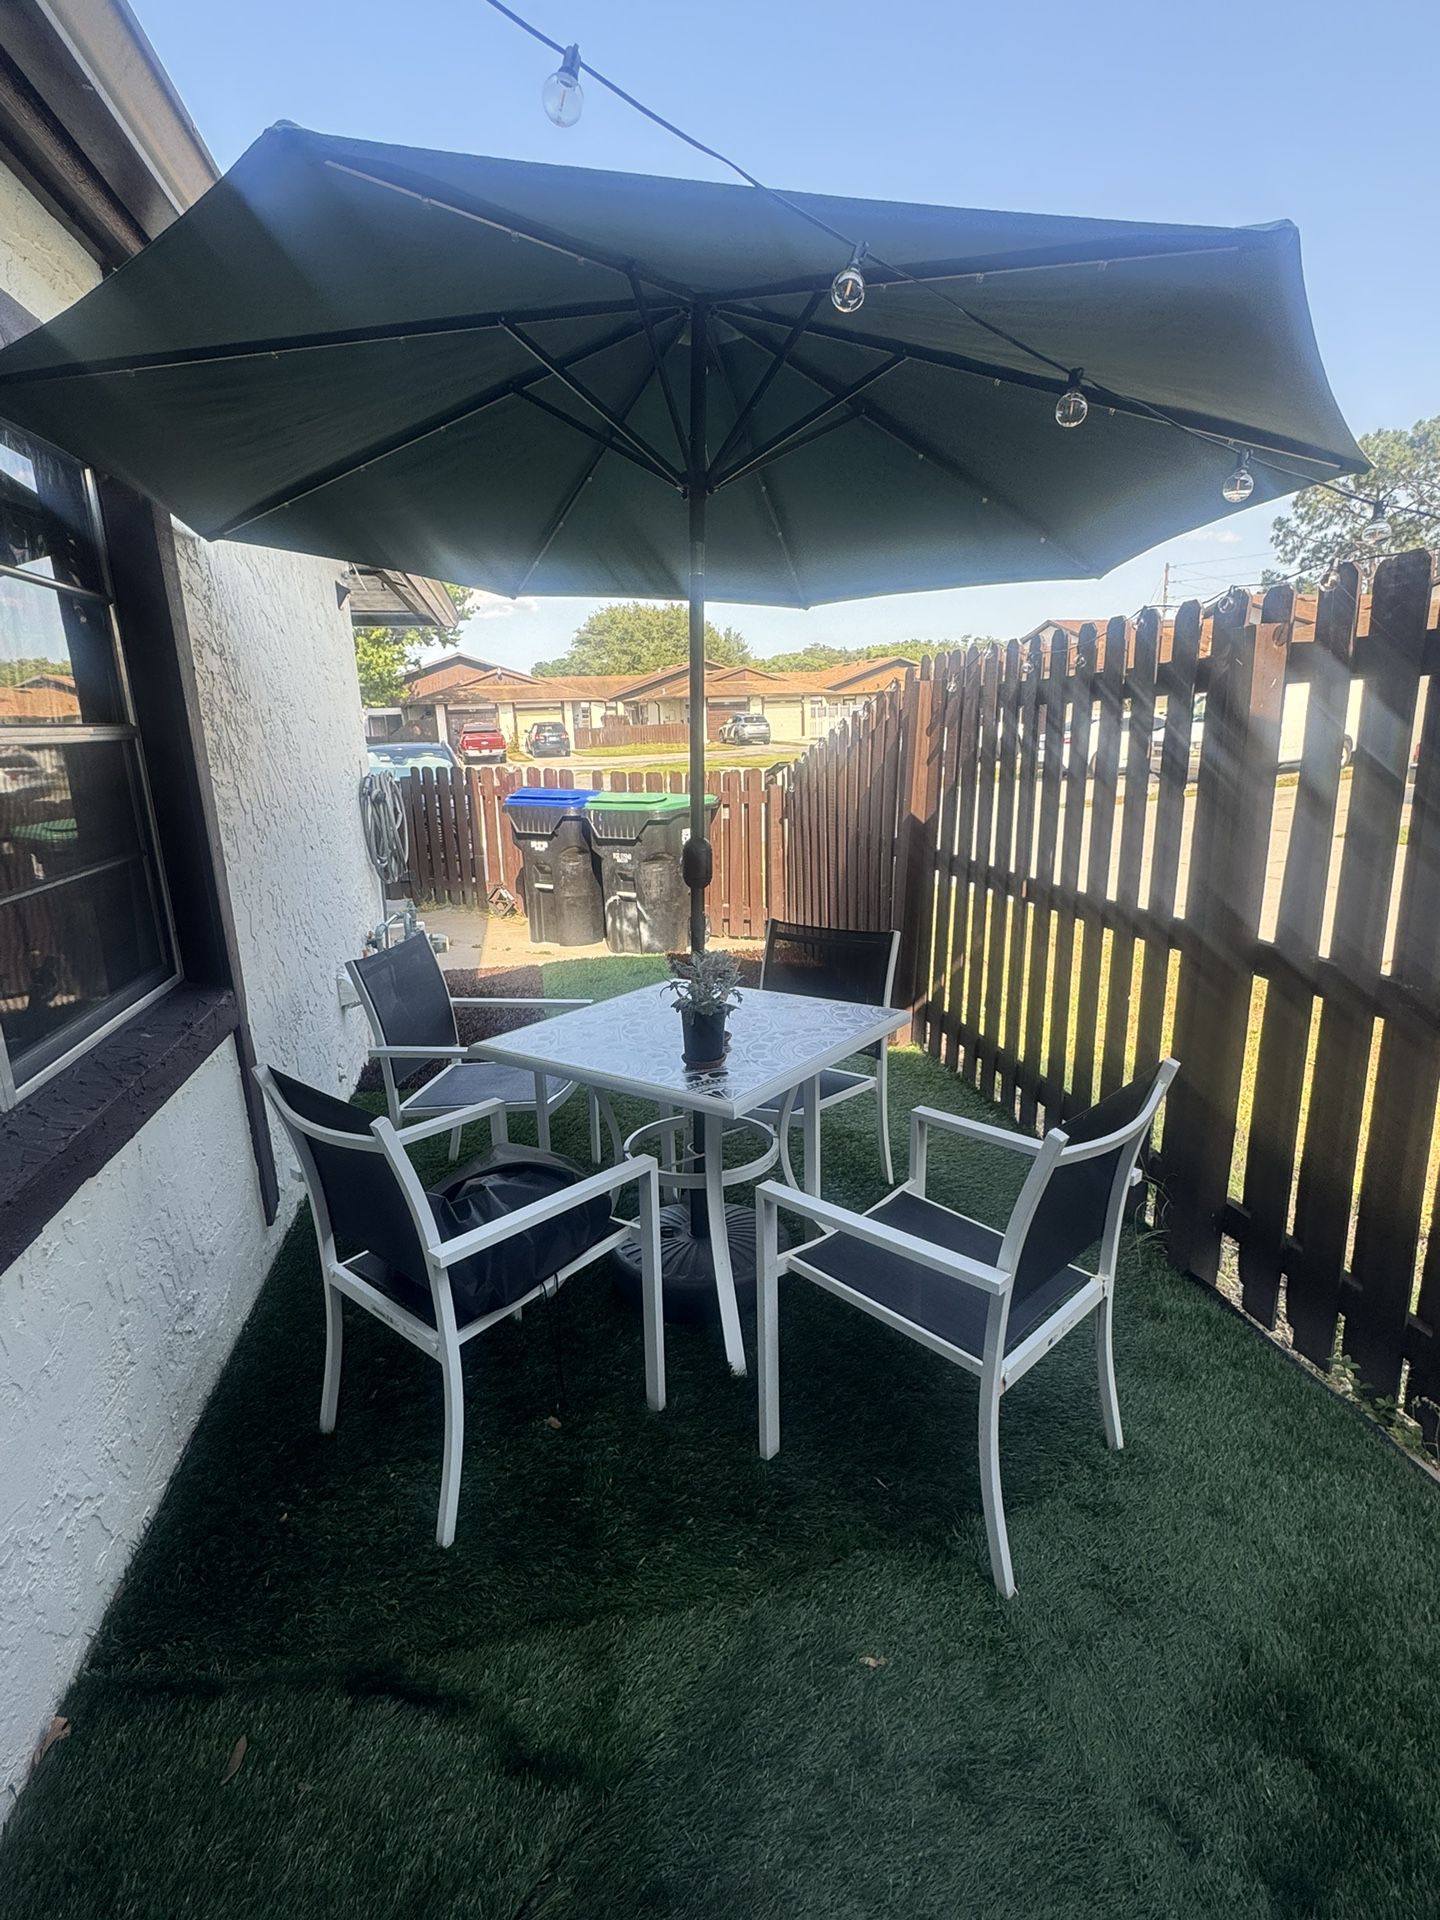 4 Metal Chairs - Patio Set With Umbrella 